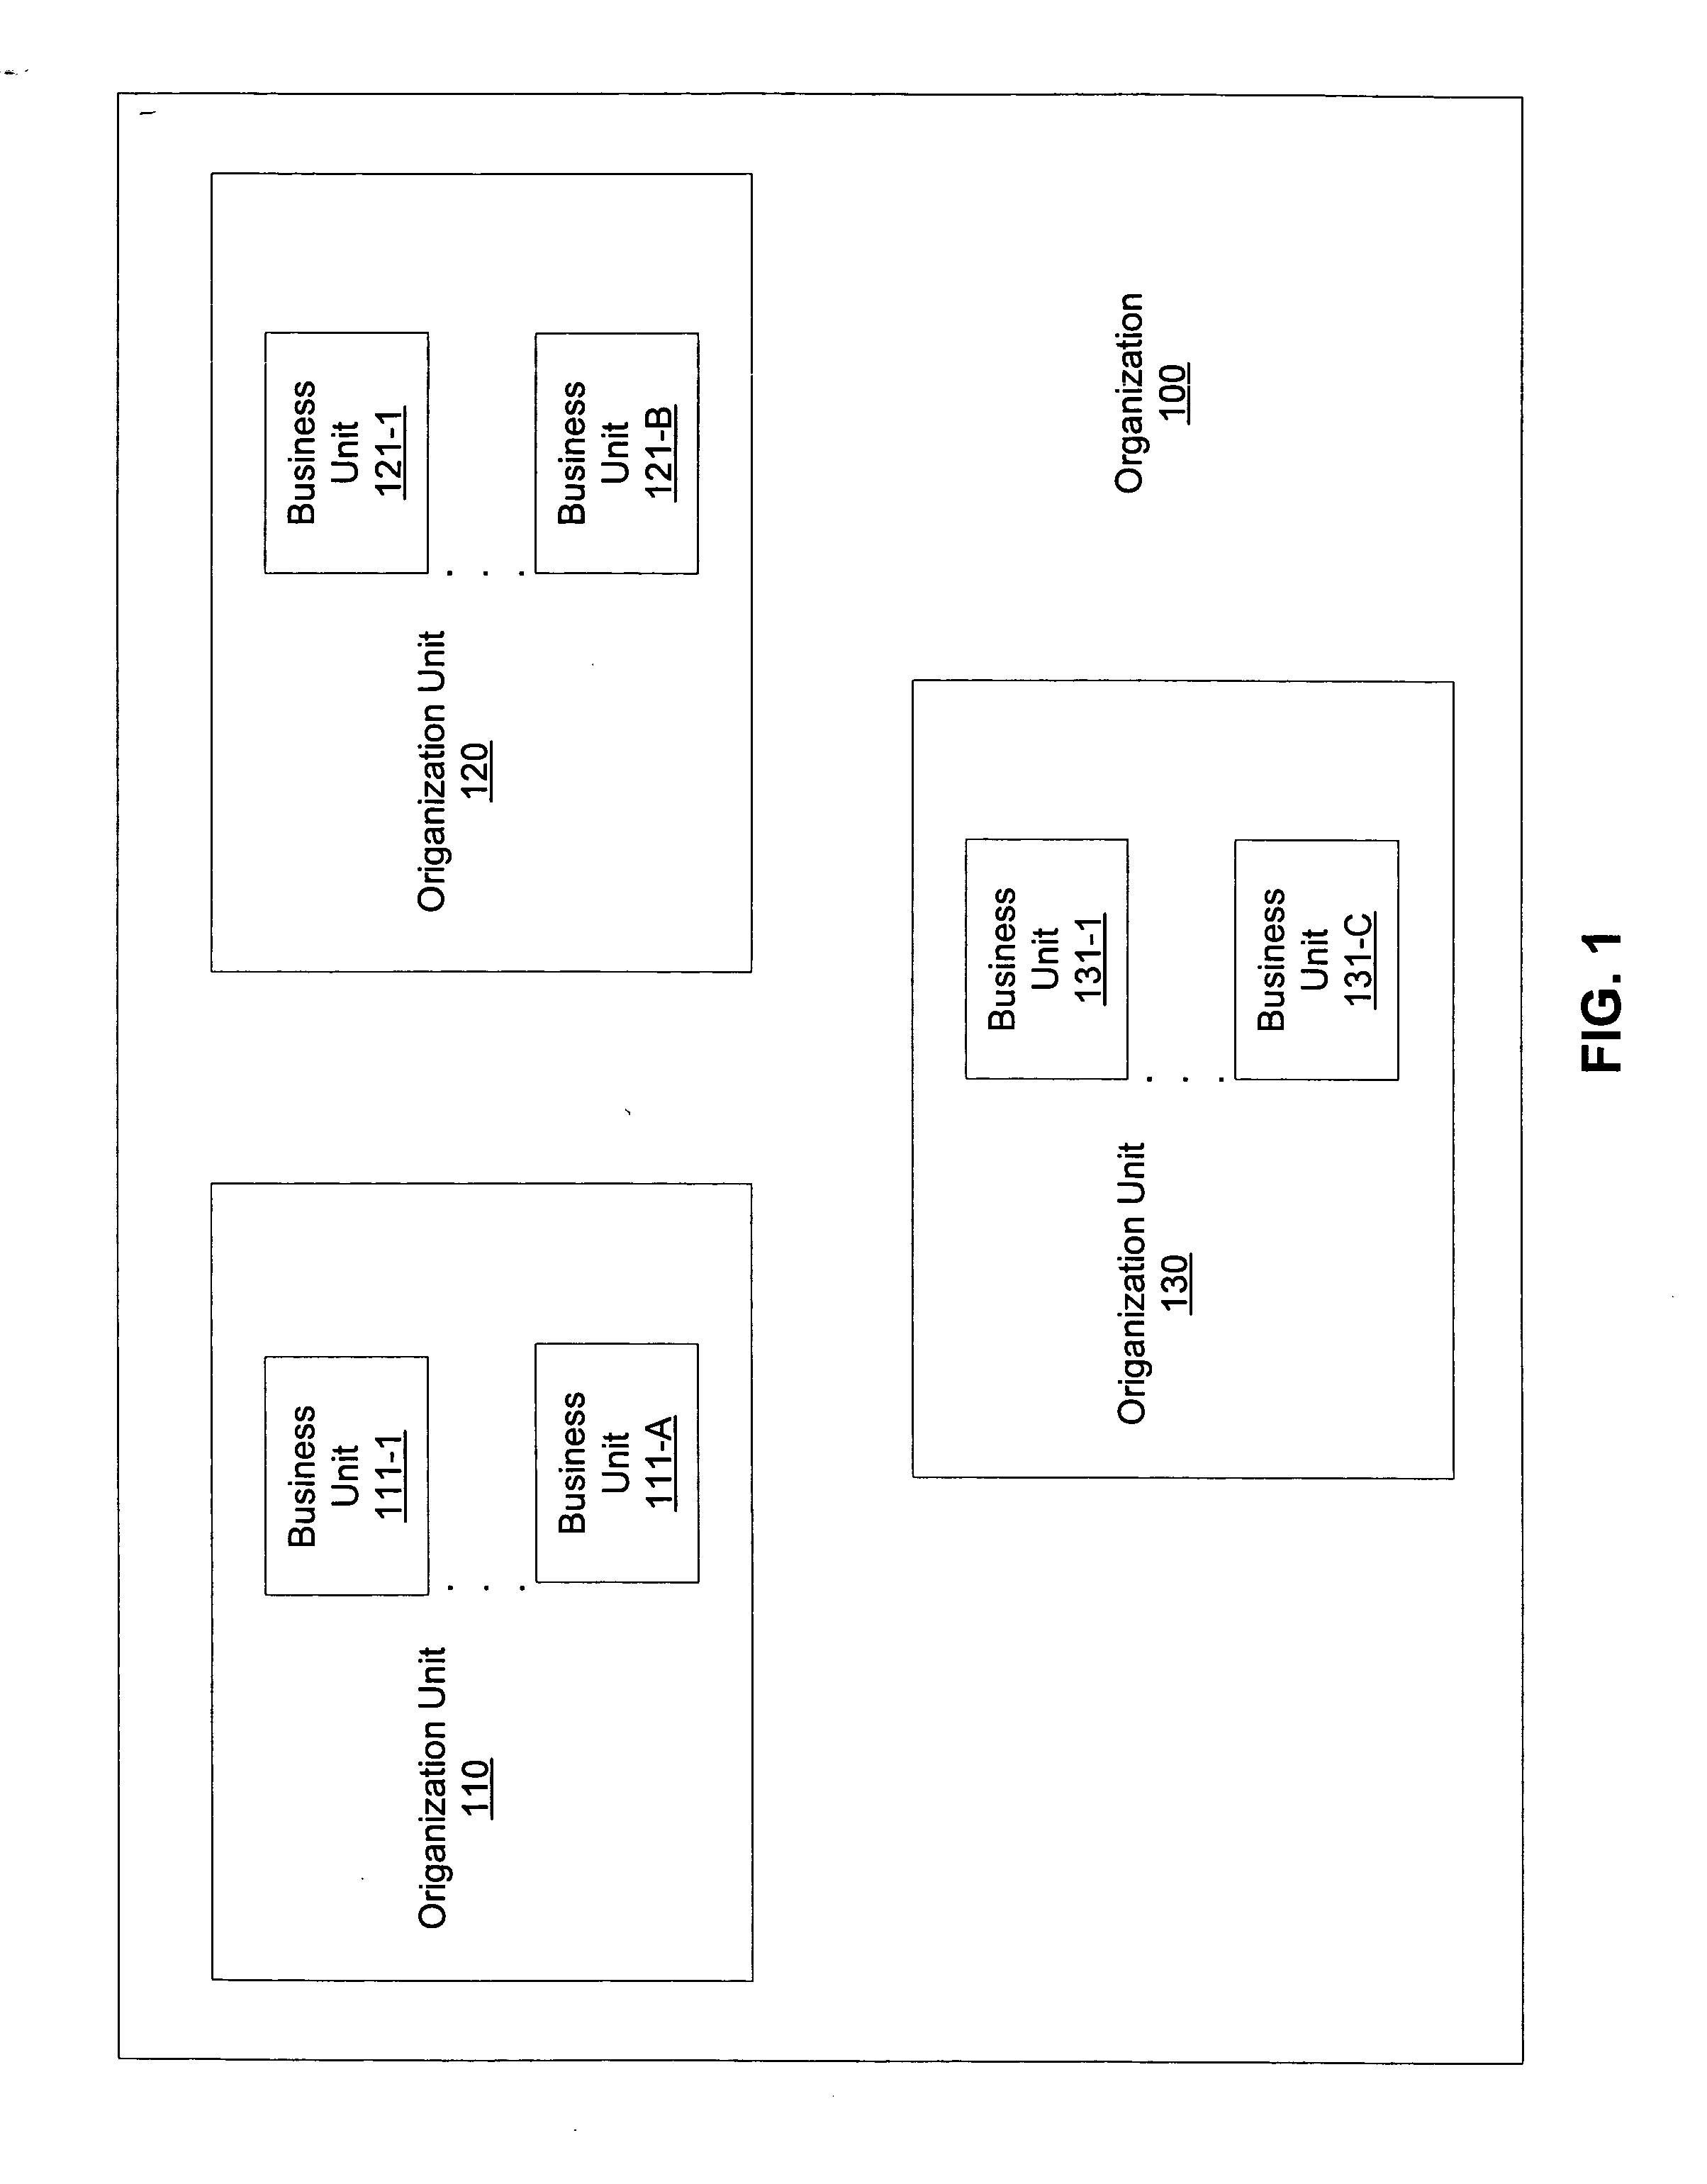 Systems and methods for assigning task-oriented roles to users